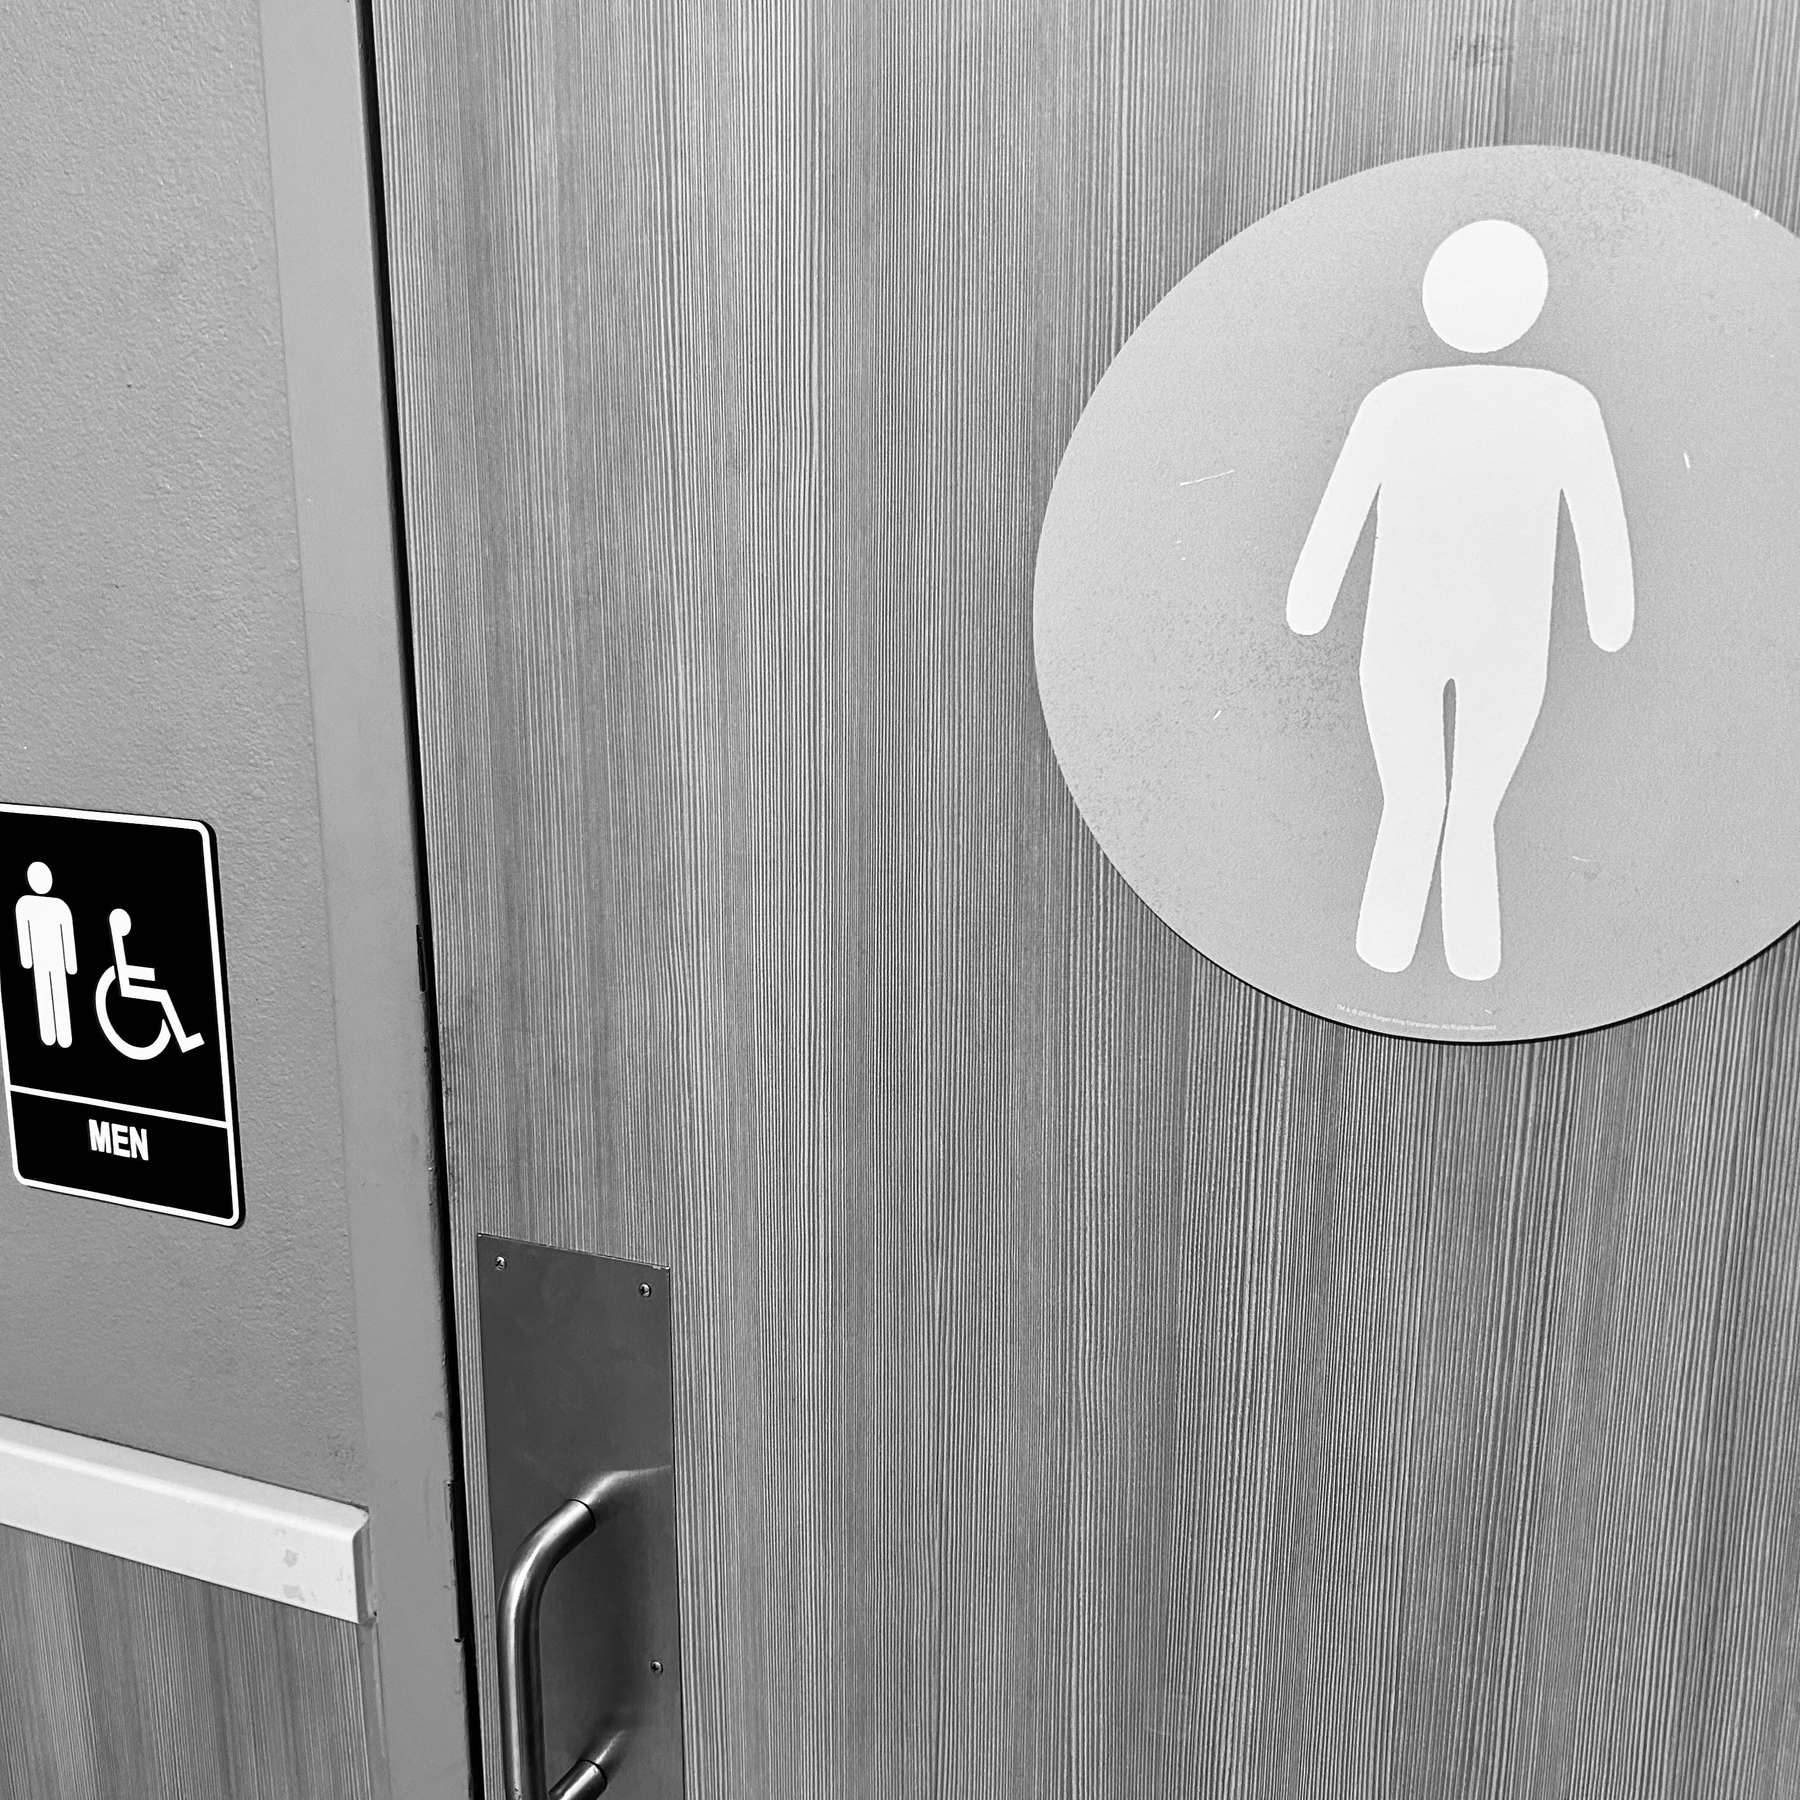 A bathroom sign of a man squeezing his knees together